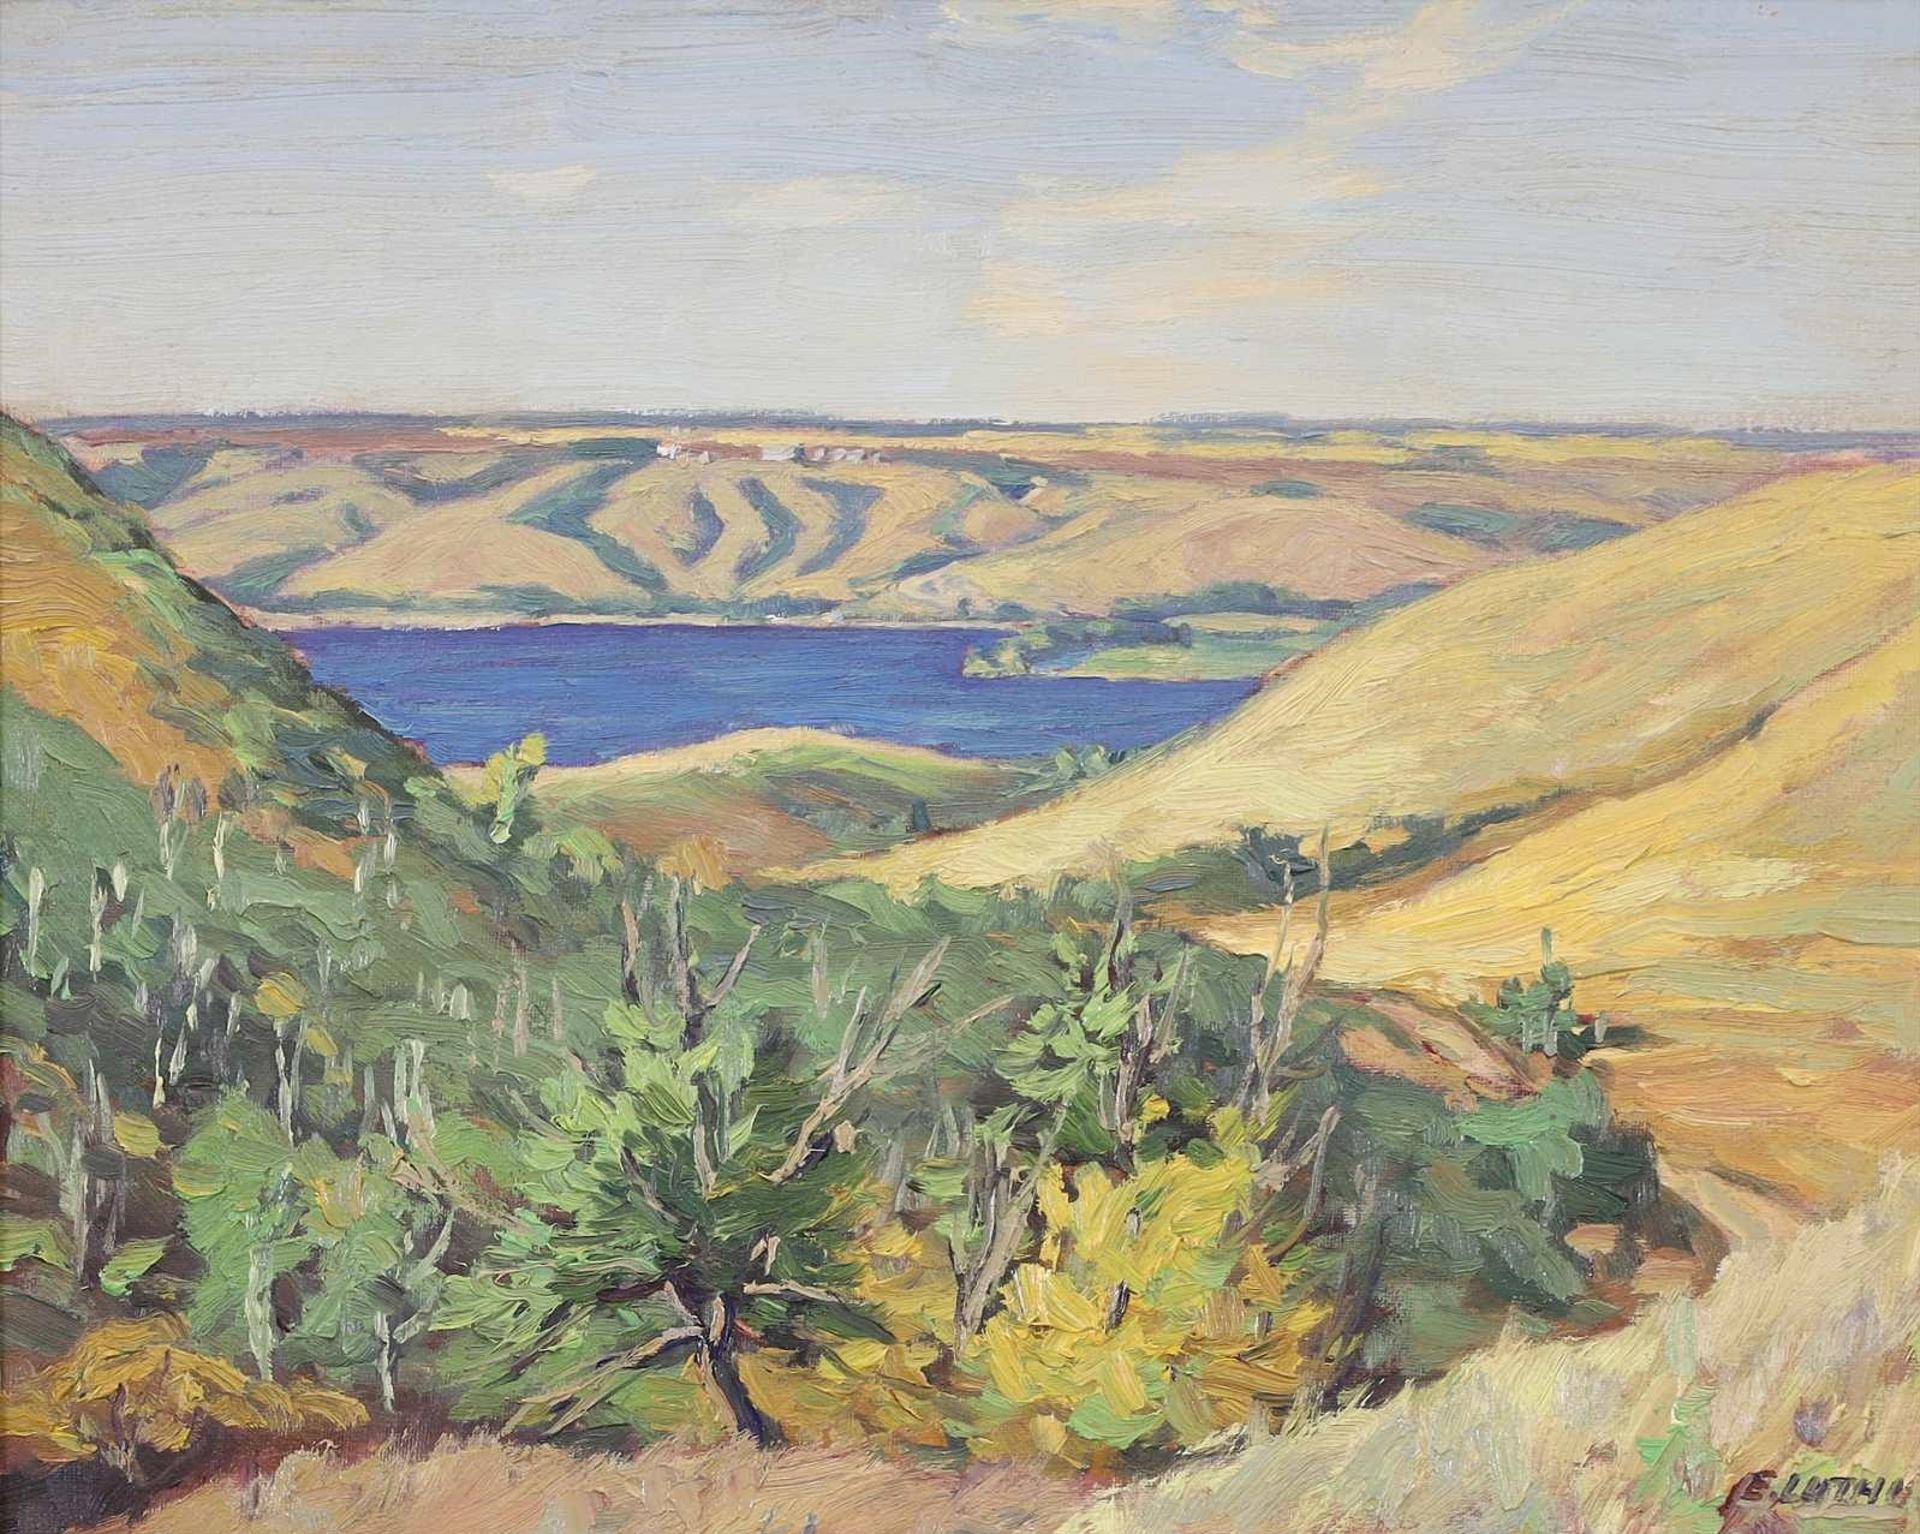 Ernest (Ernie) Luthi (1906-1983) - South Of The Sioux Bridge, East End Of Pasqua Lake